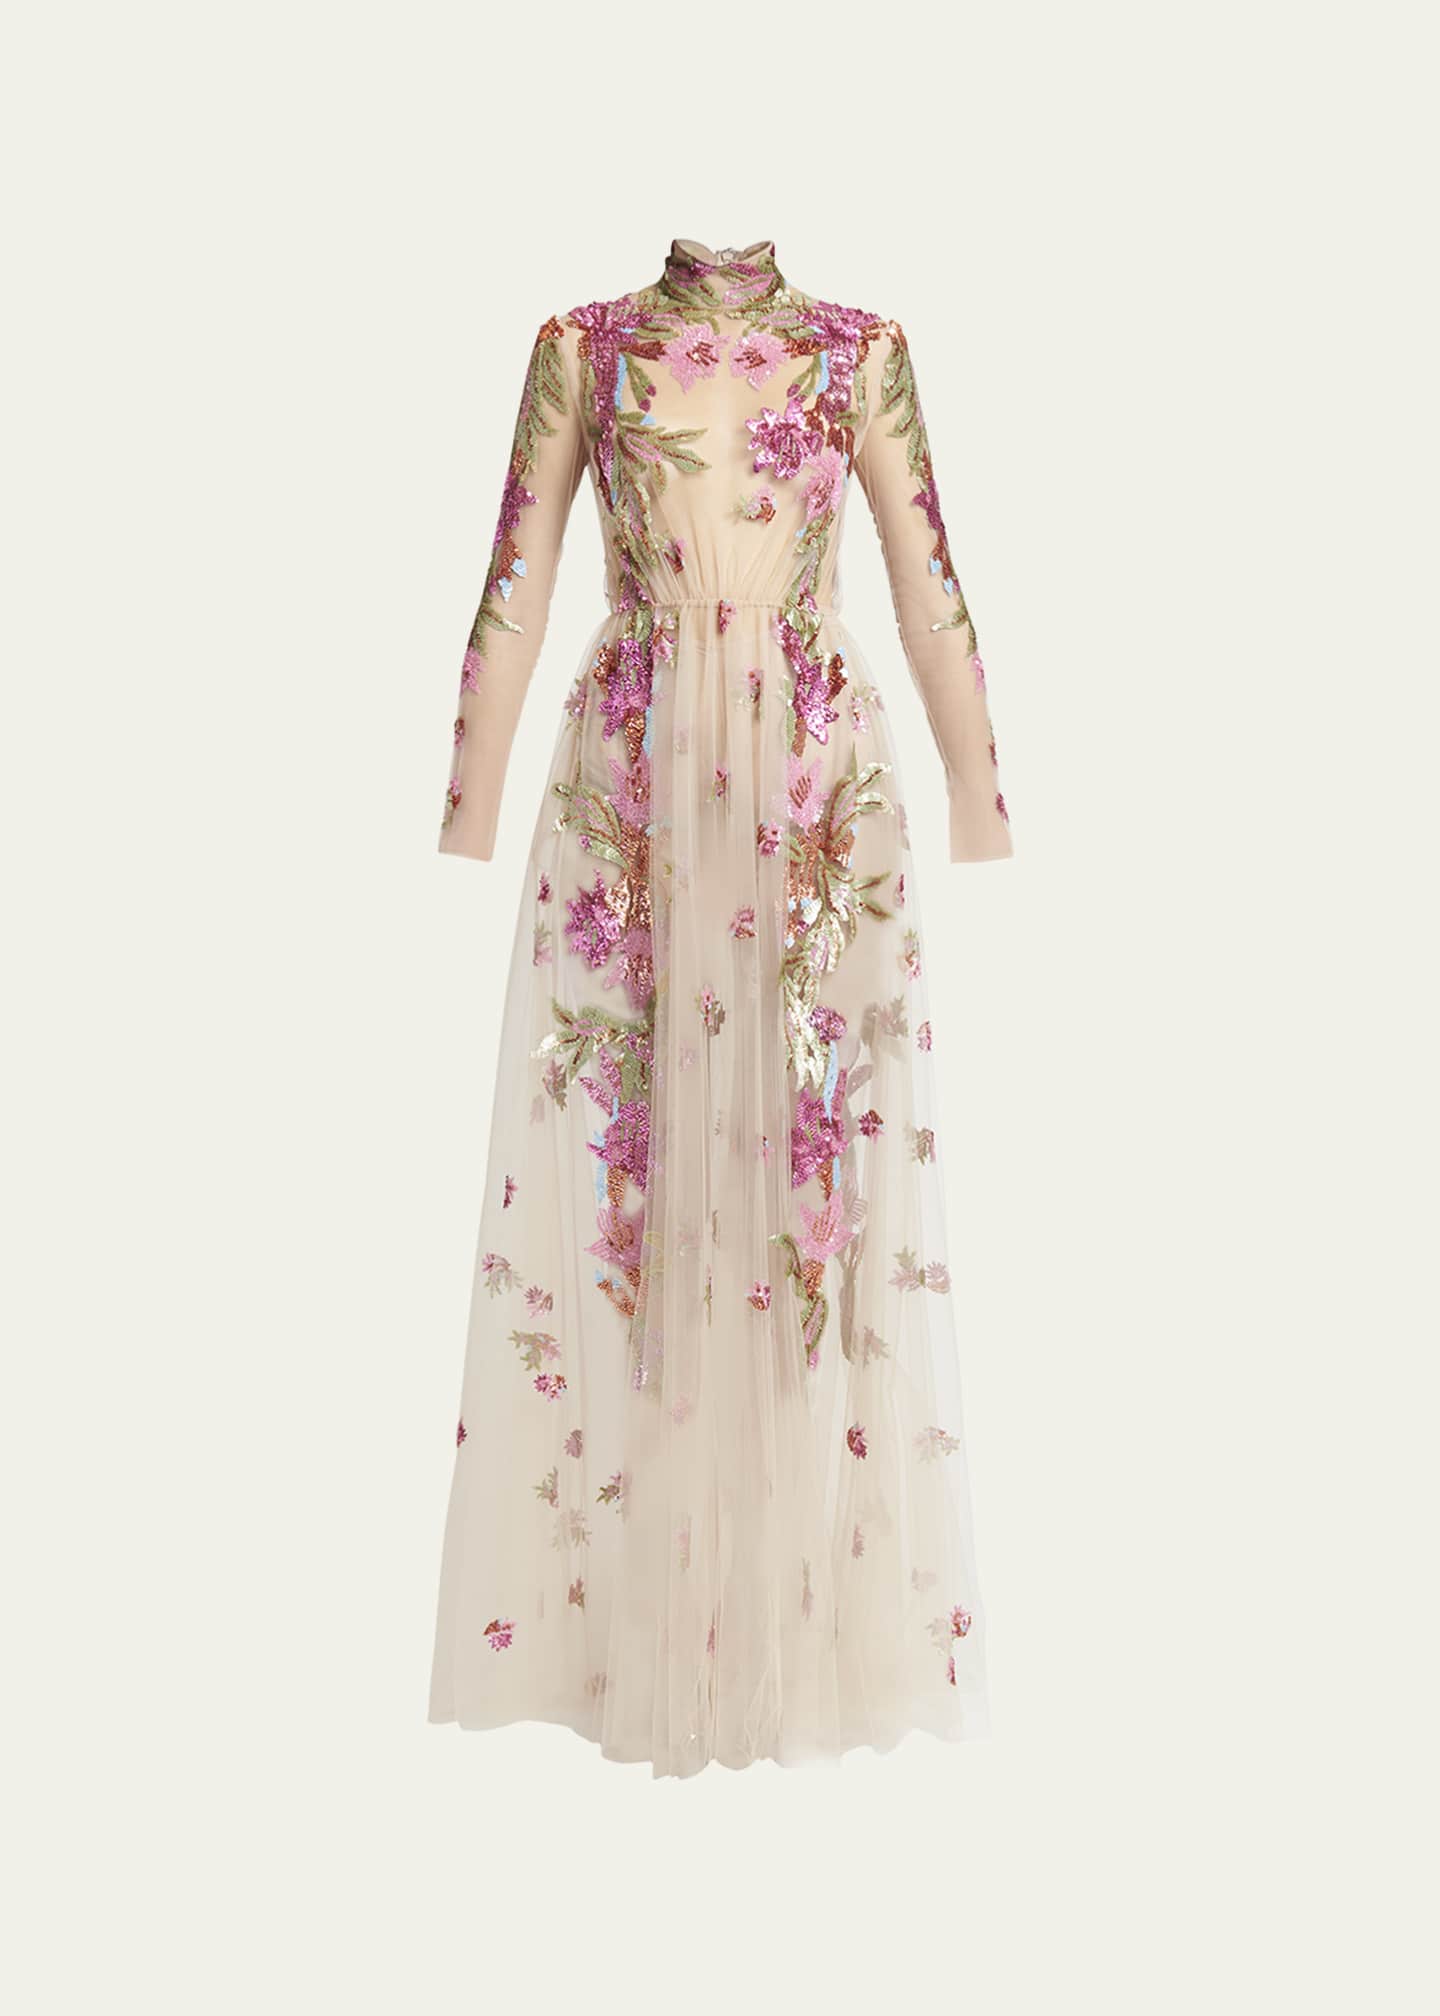 Valentino Garavani Embroidered Tulle Illusion Gown with Floral Details ...